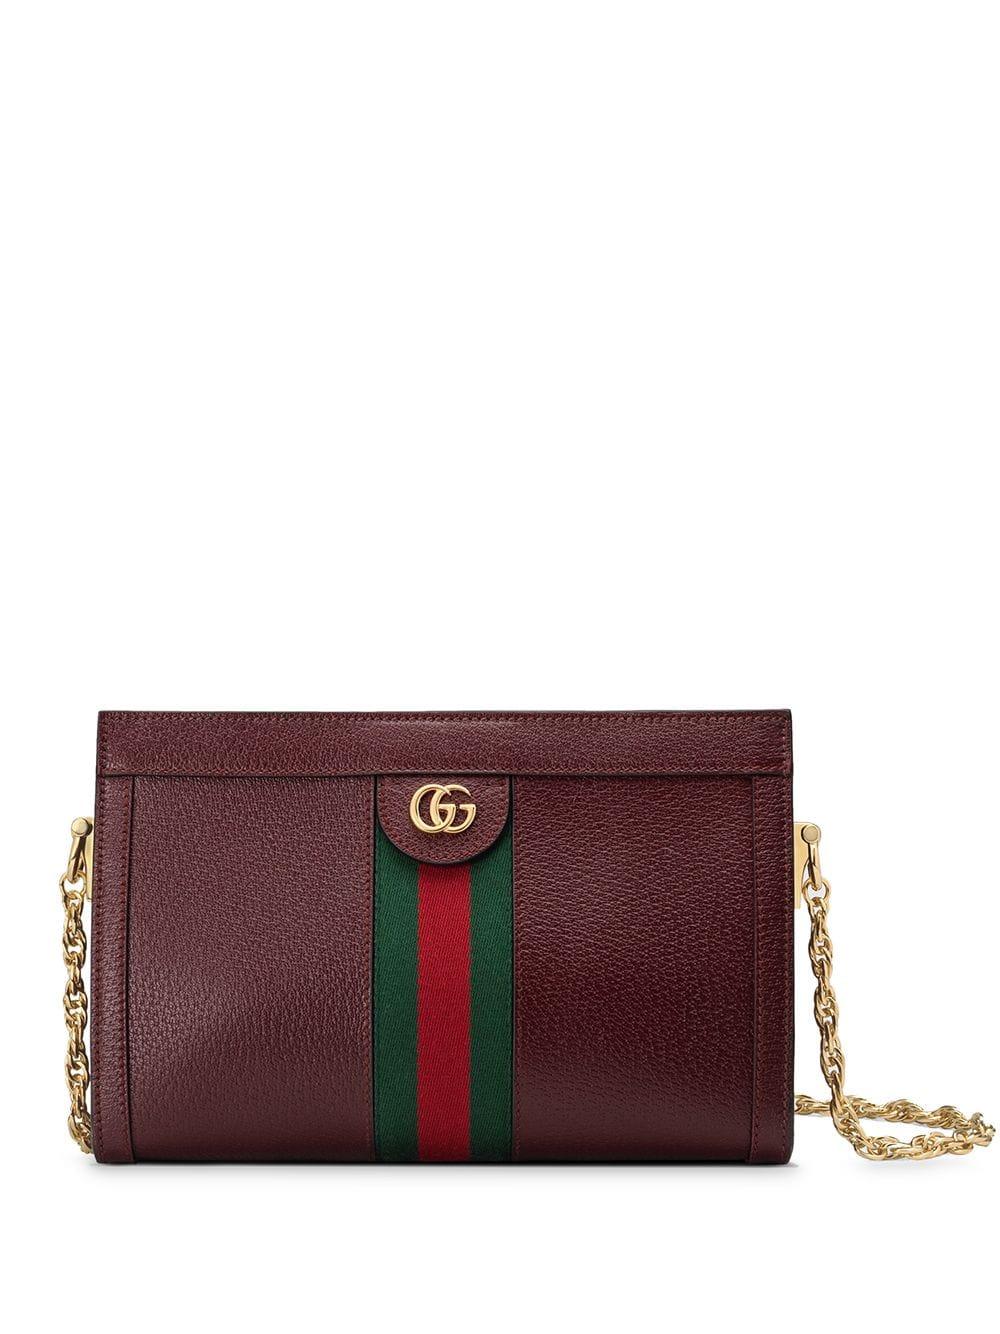 Gucci Ophidia Small Shoulder Bag in Red - Lyst